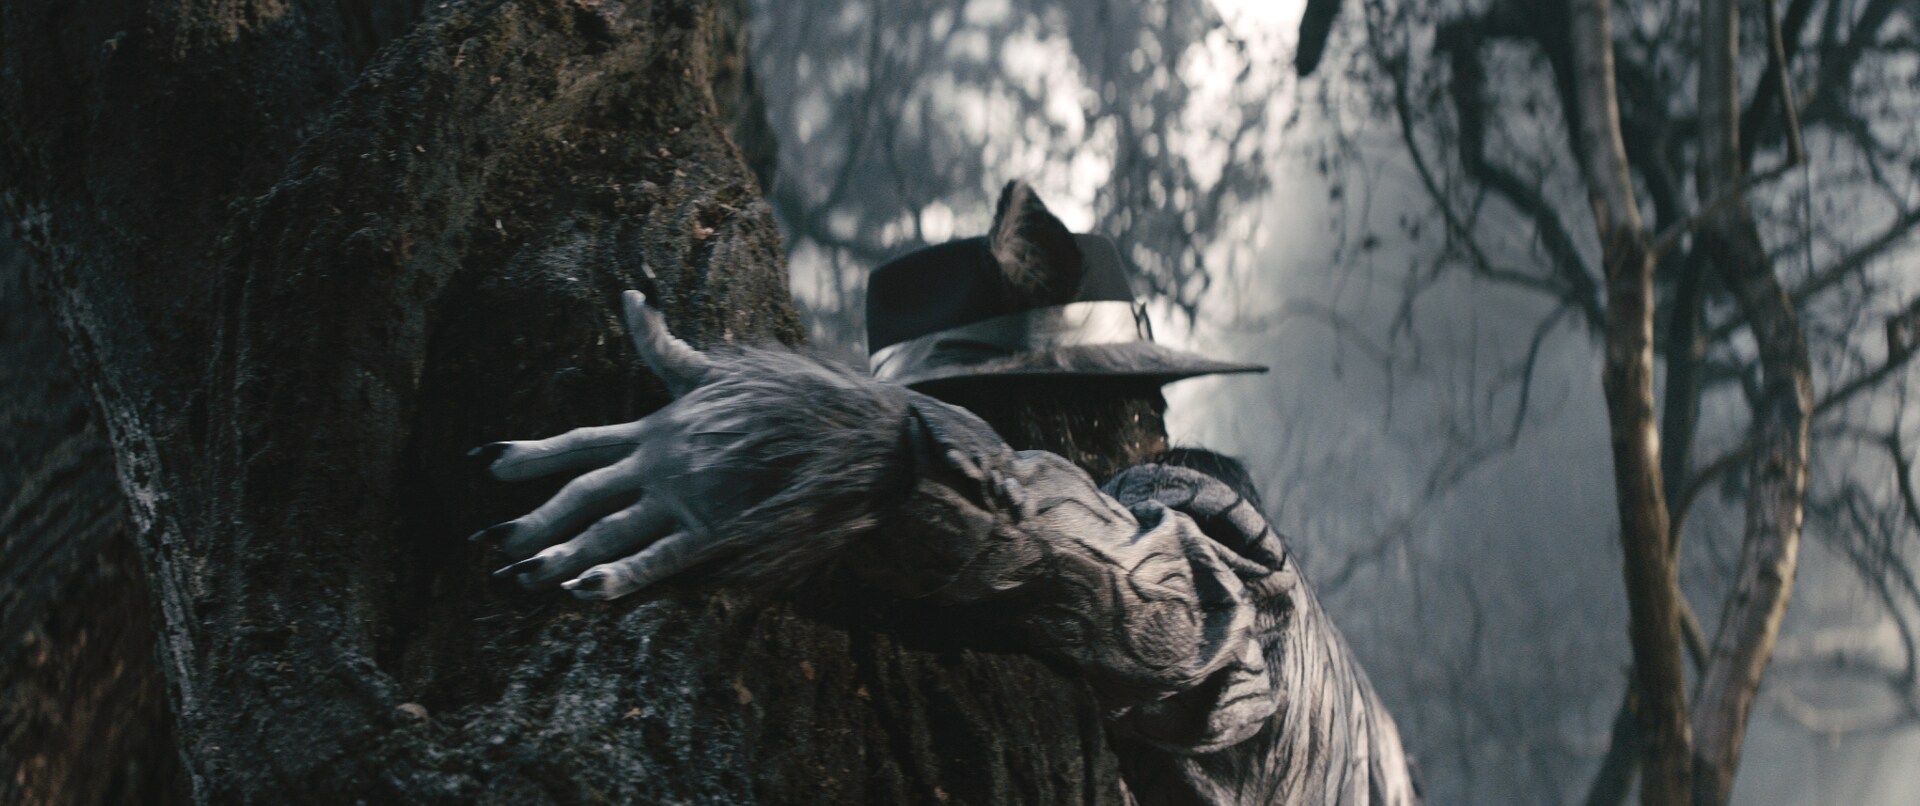 Johnny Depp fills the shoes of the Big Bad Wolf in “Into the Woods"